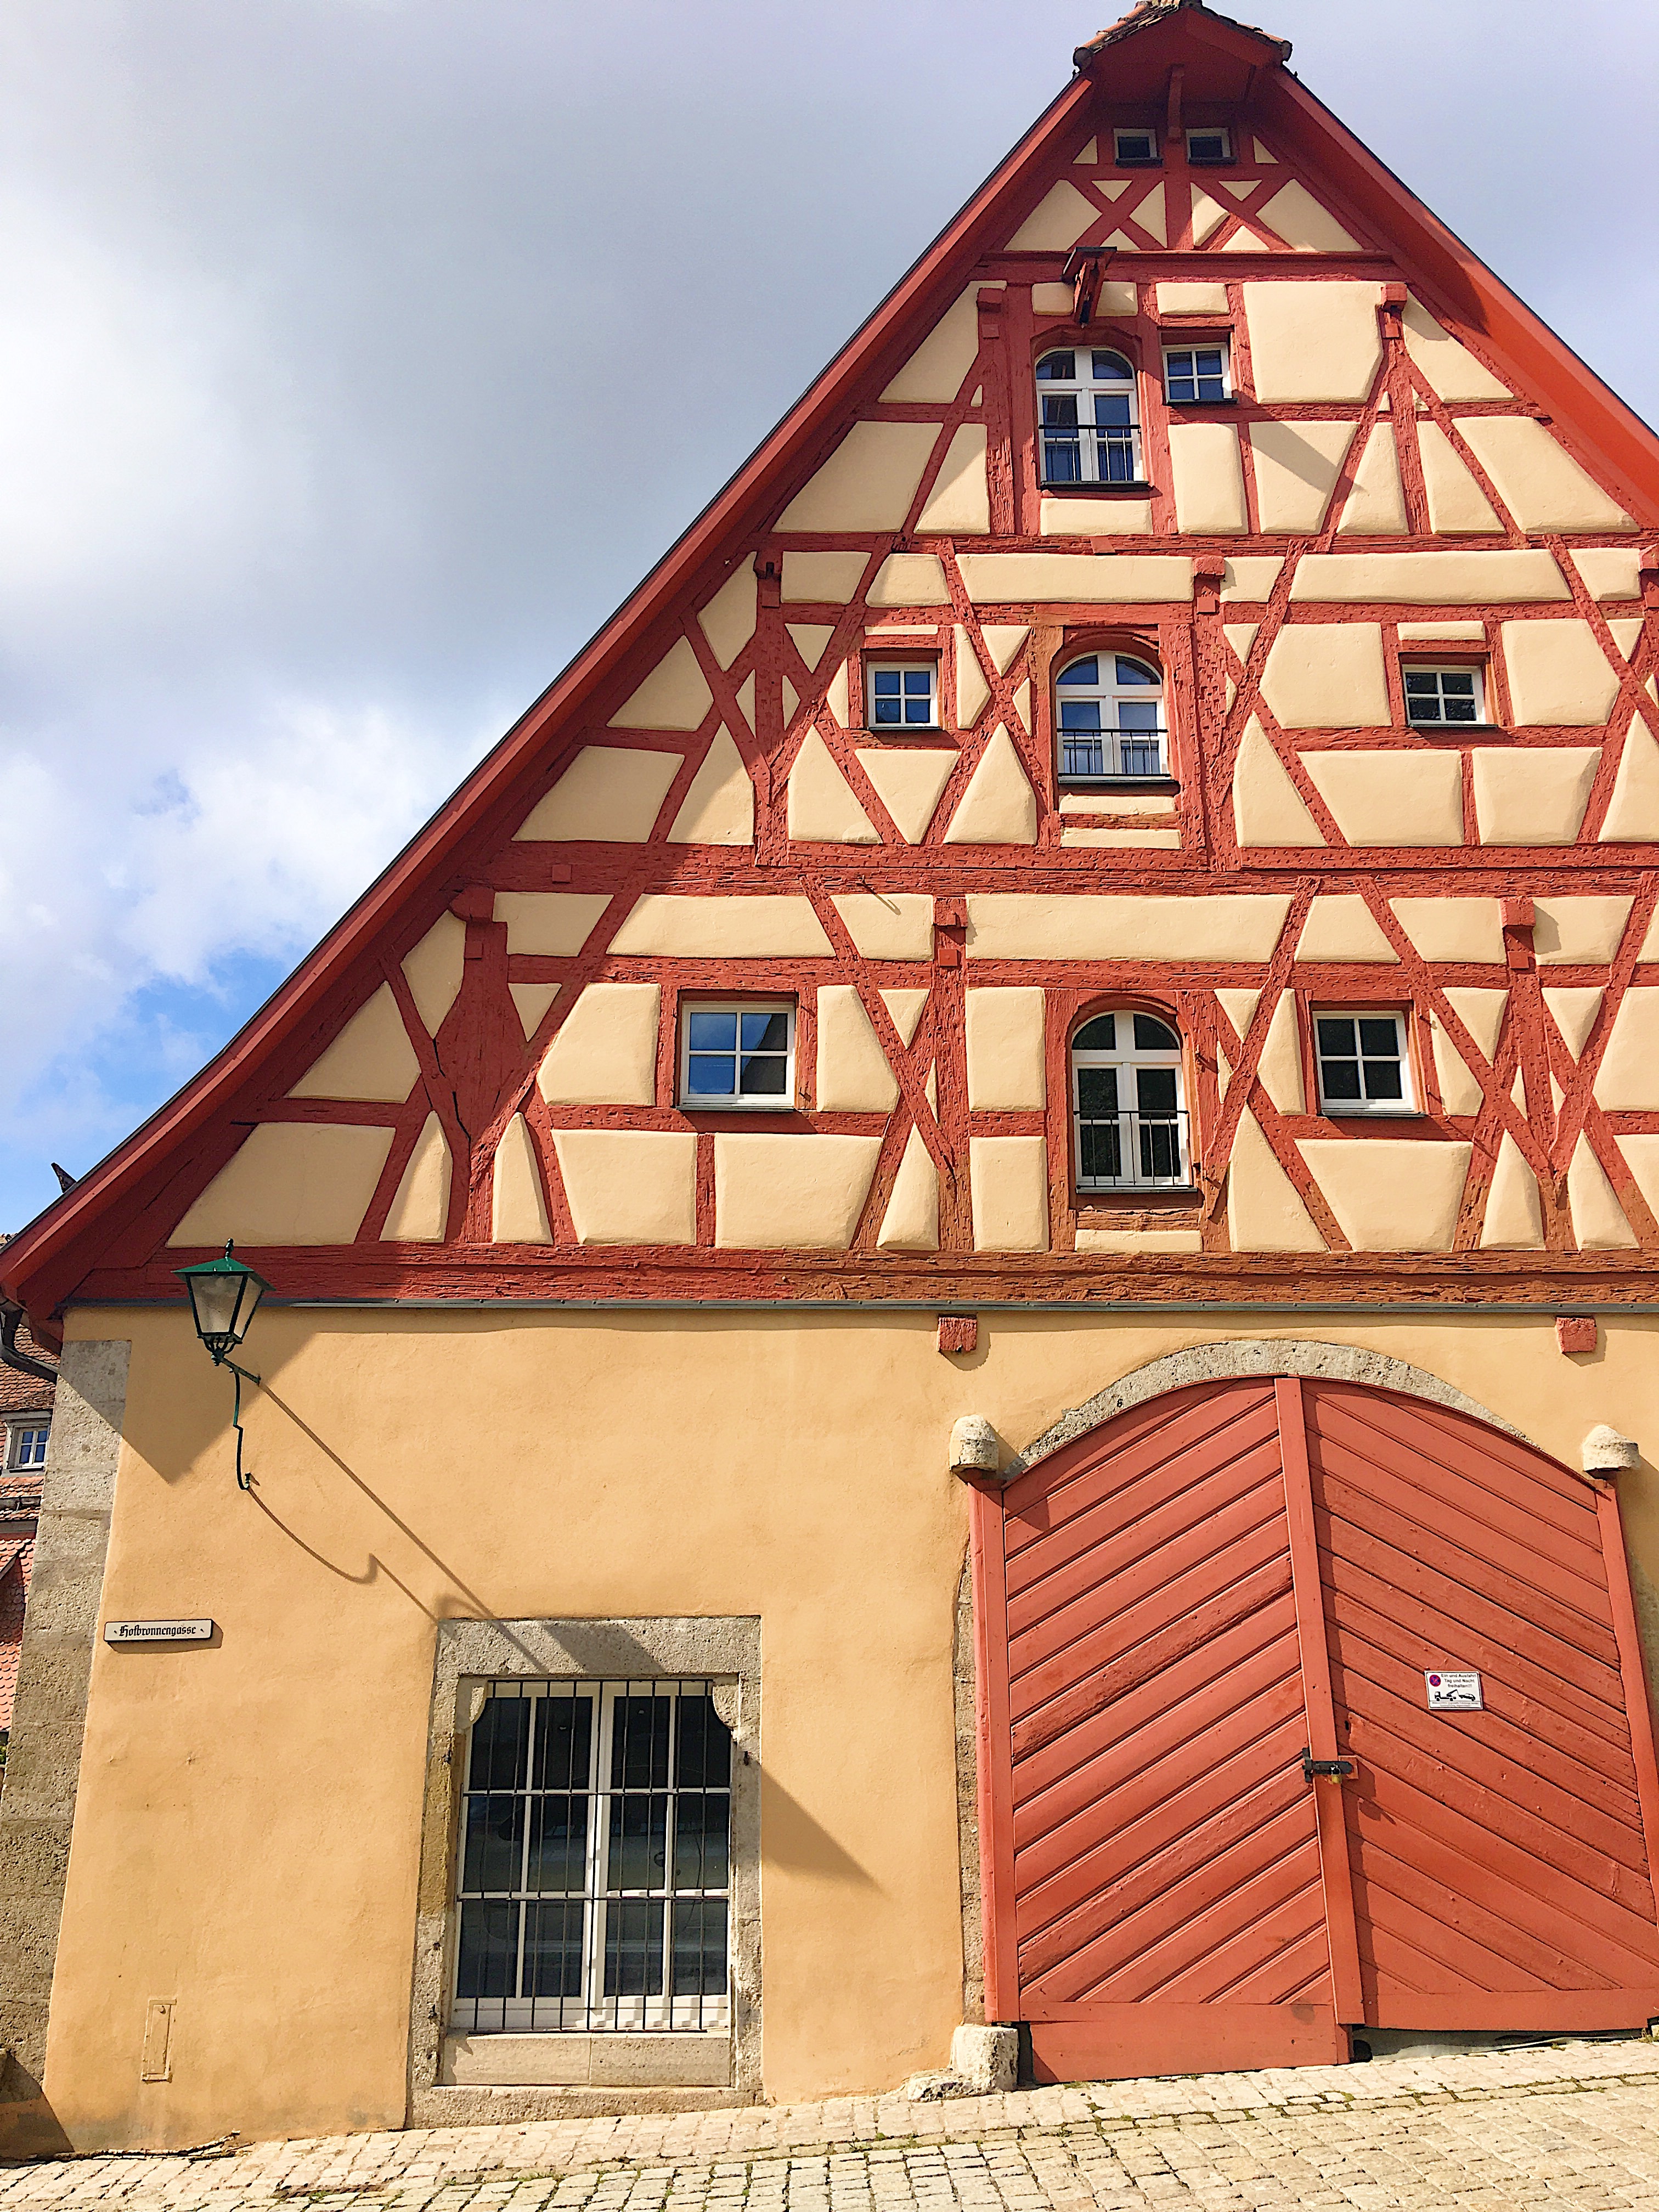 Timbered buildings in Rothenburg